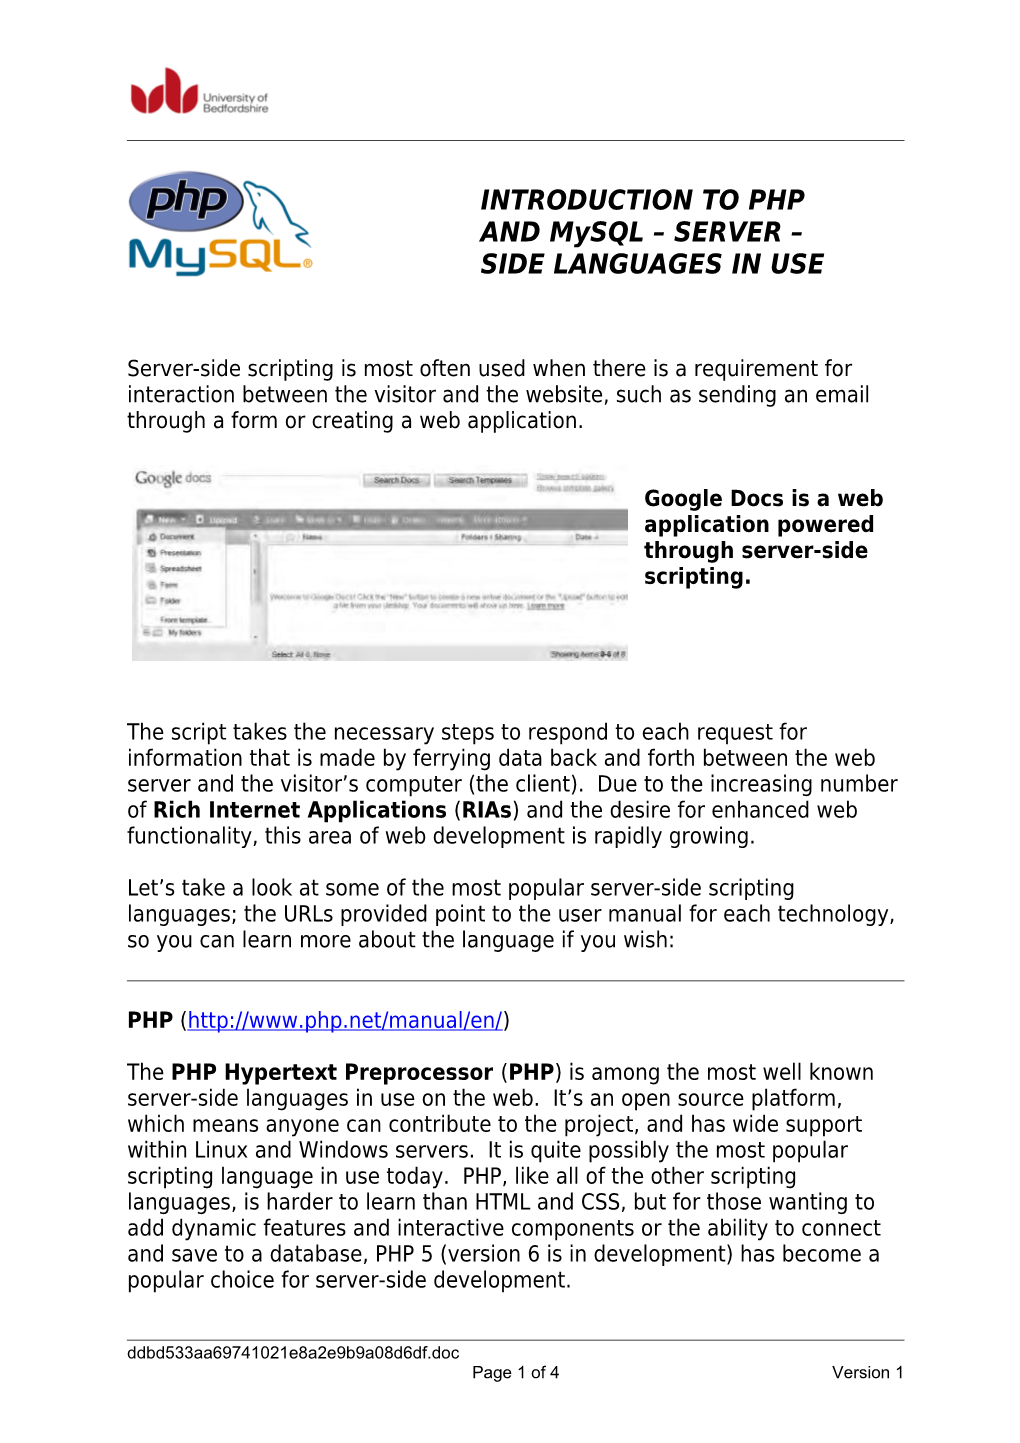 INTRODUCTION to PHP and Mysql SERVER SIDE LANGUAGES in USE